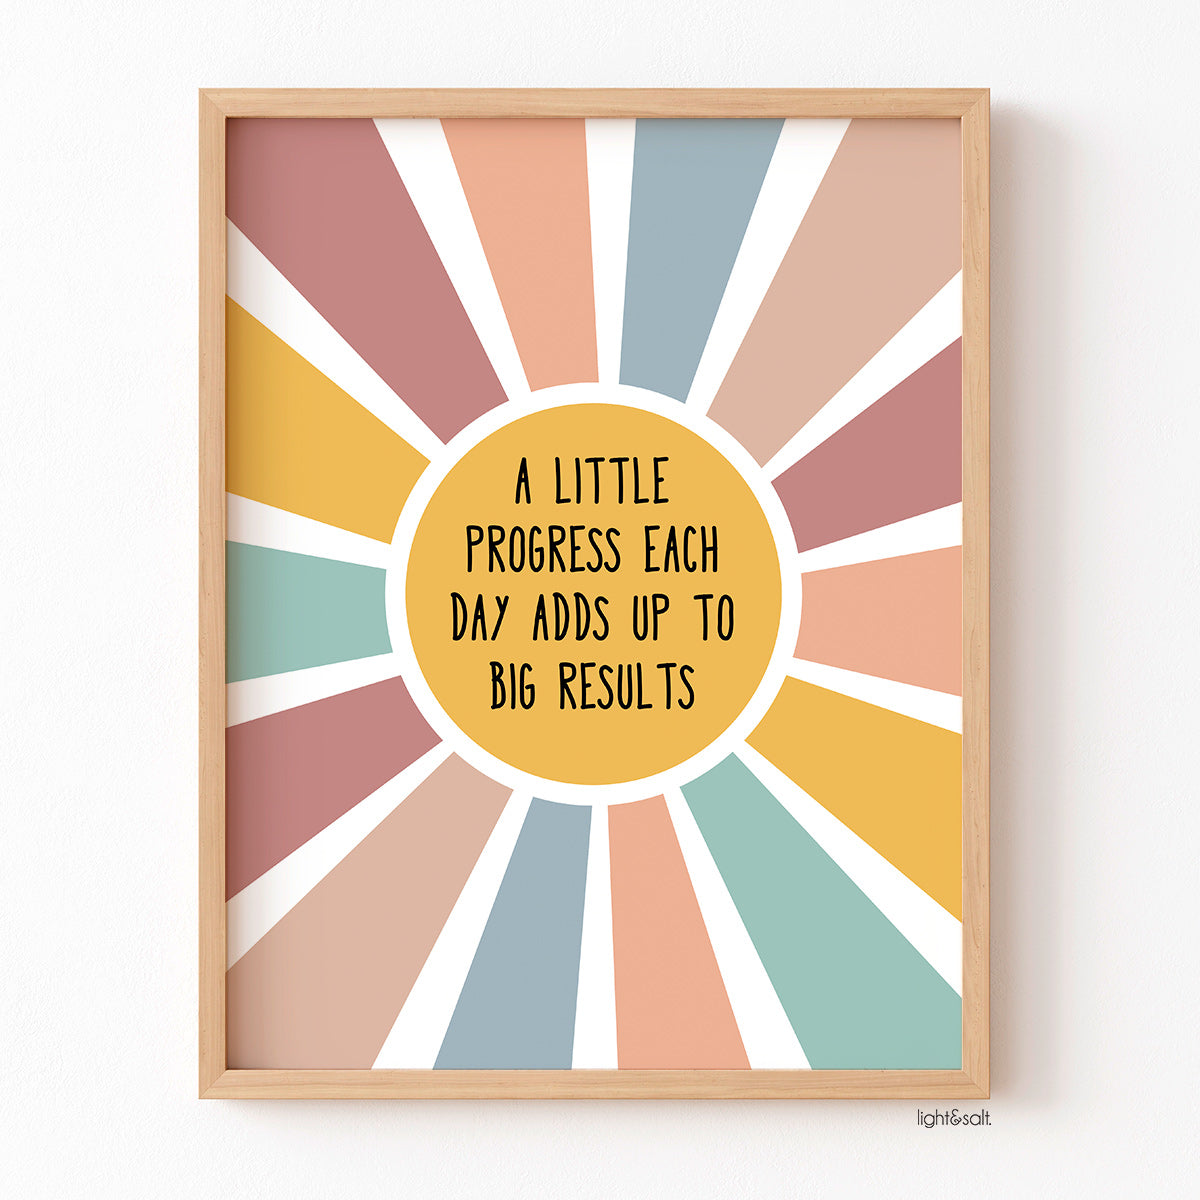 A little progress each day adds up to big results poster